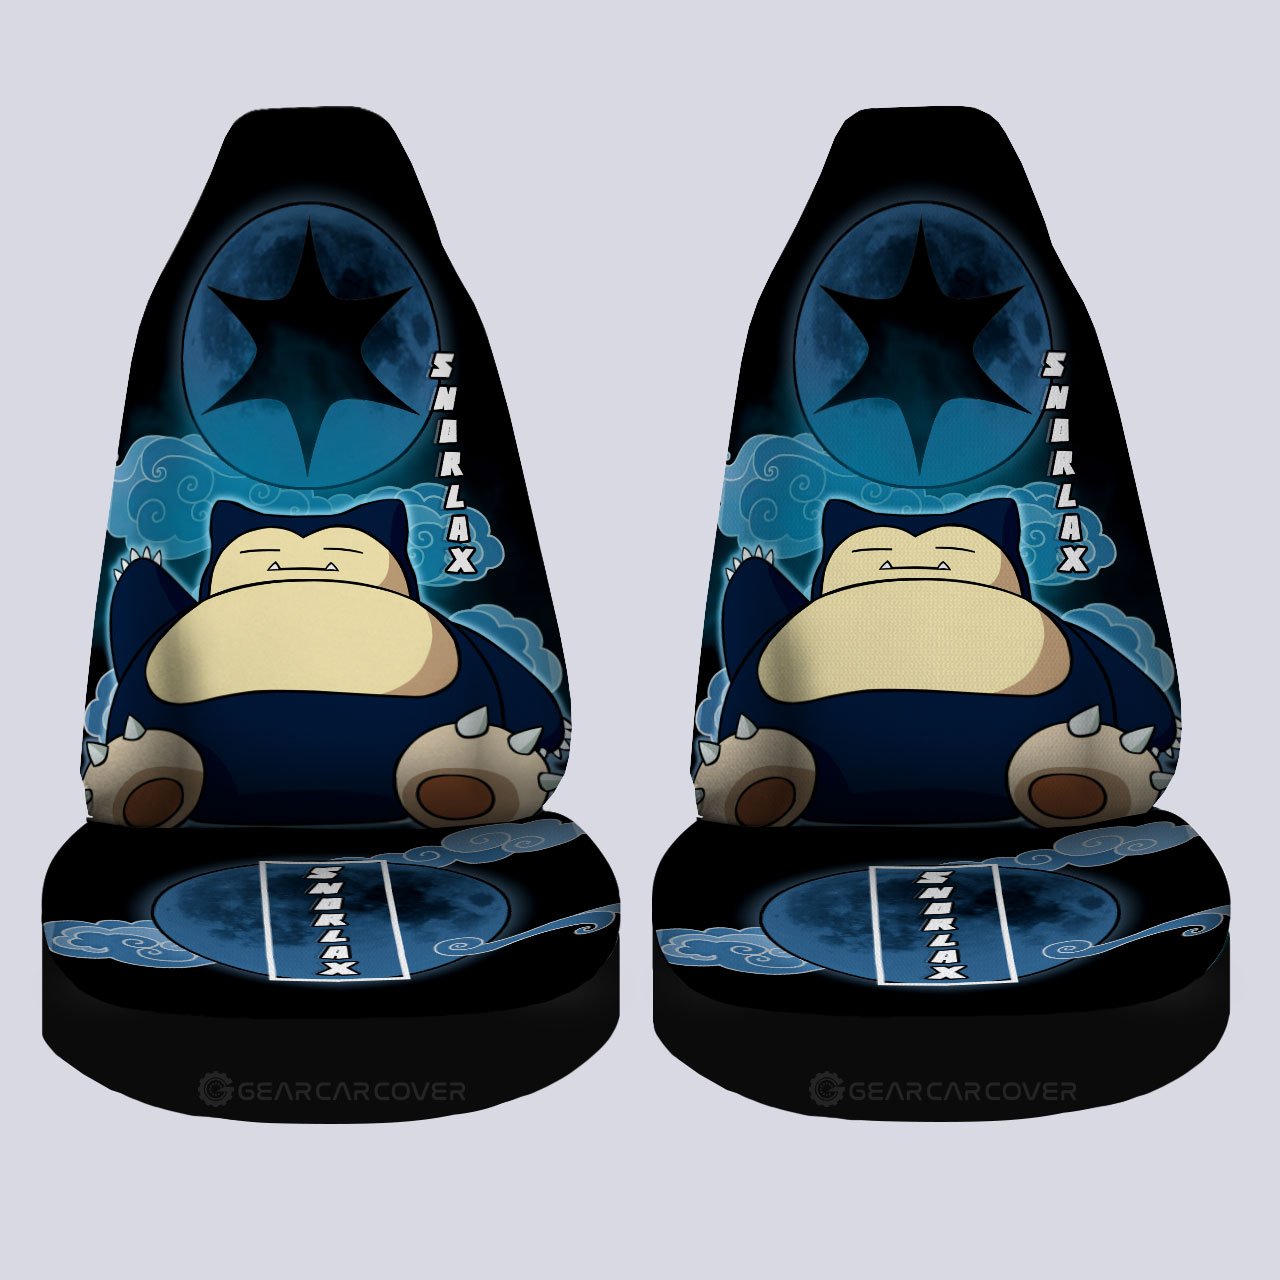 Snorlax Car Seat Covers Custom Anime Car Accessories For Anime Fans - Gearcarcover - 4